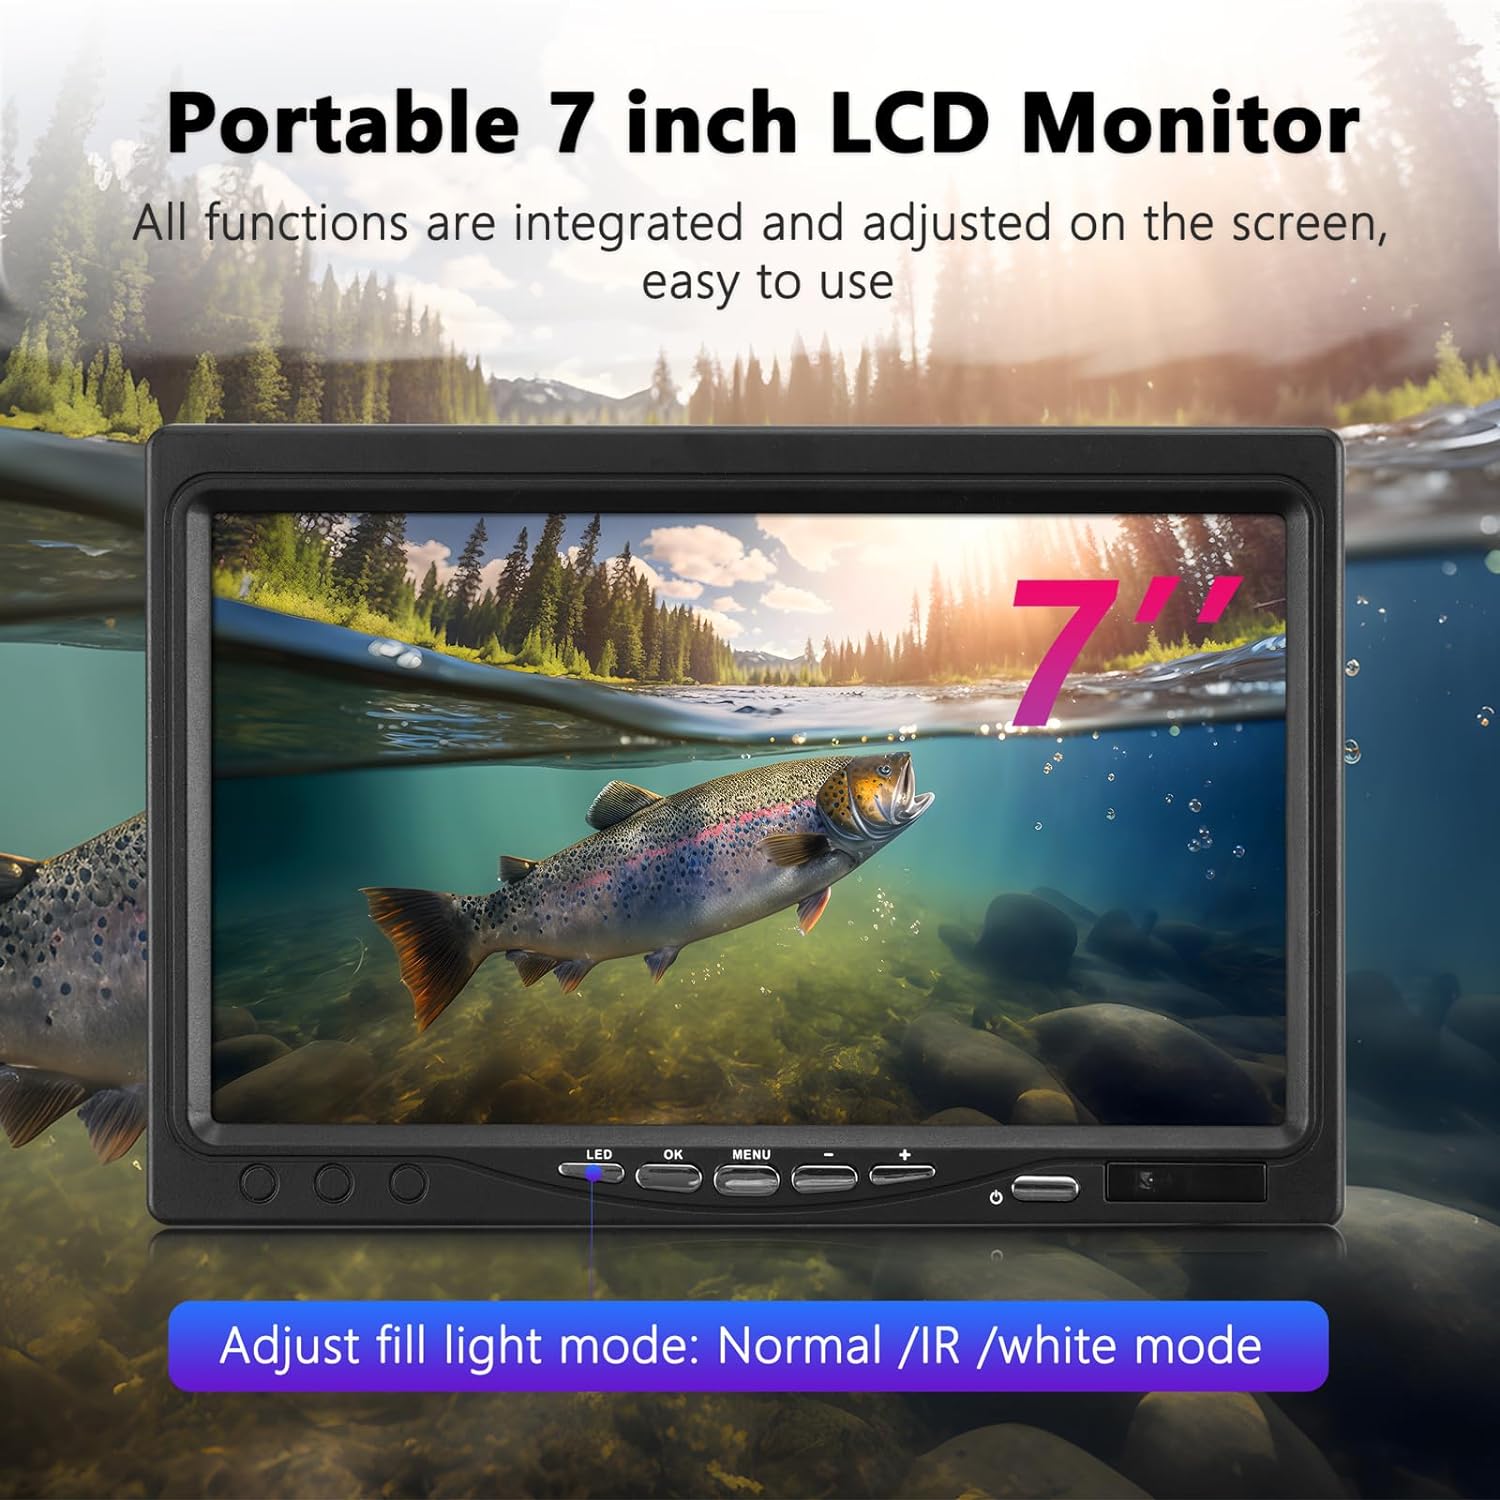 Portable Video Fish Finder Camera Review